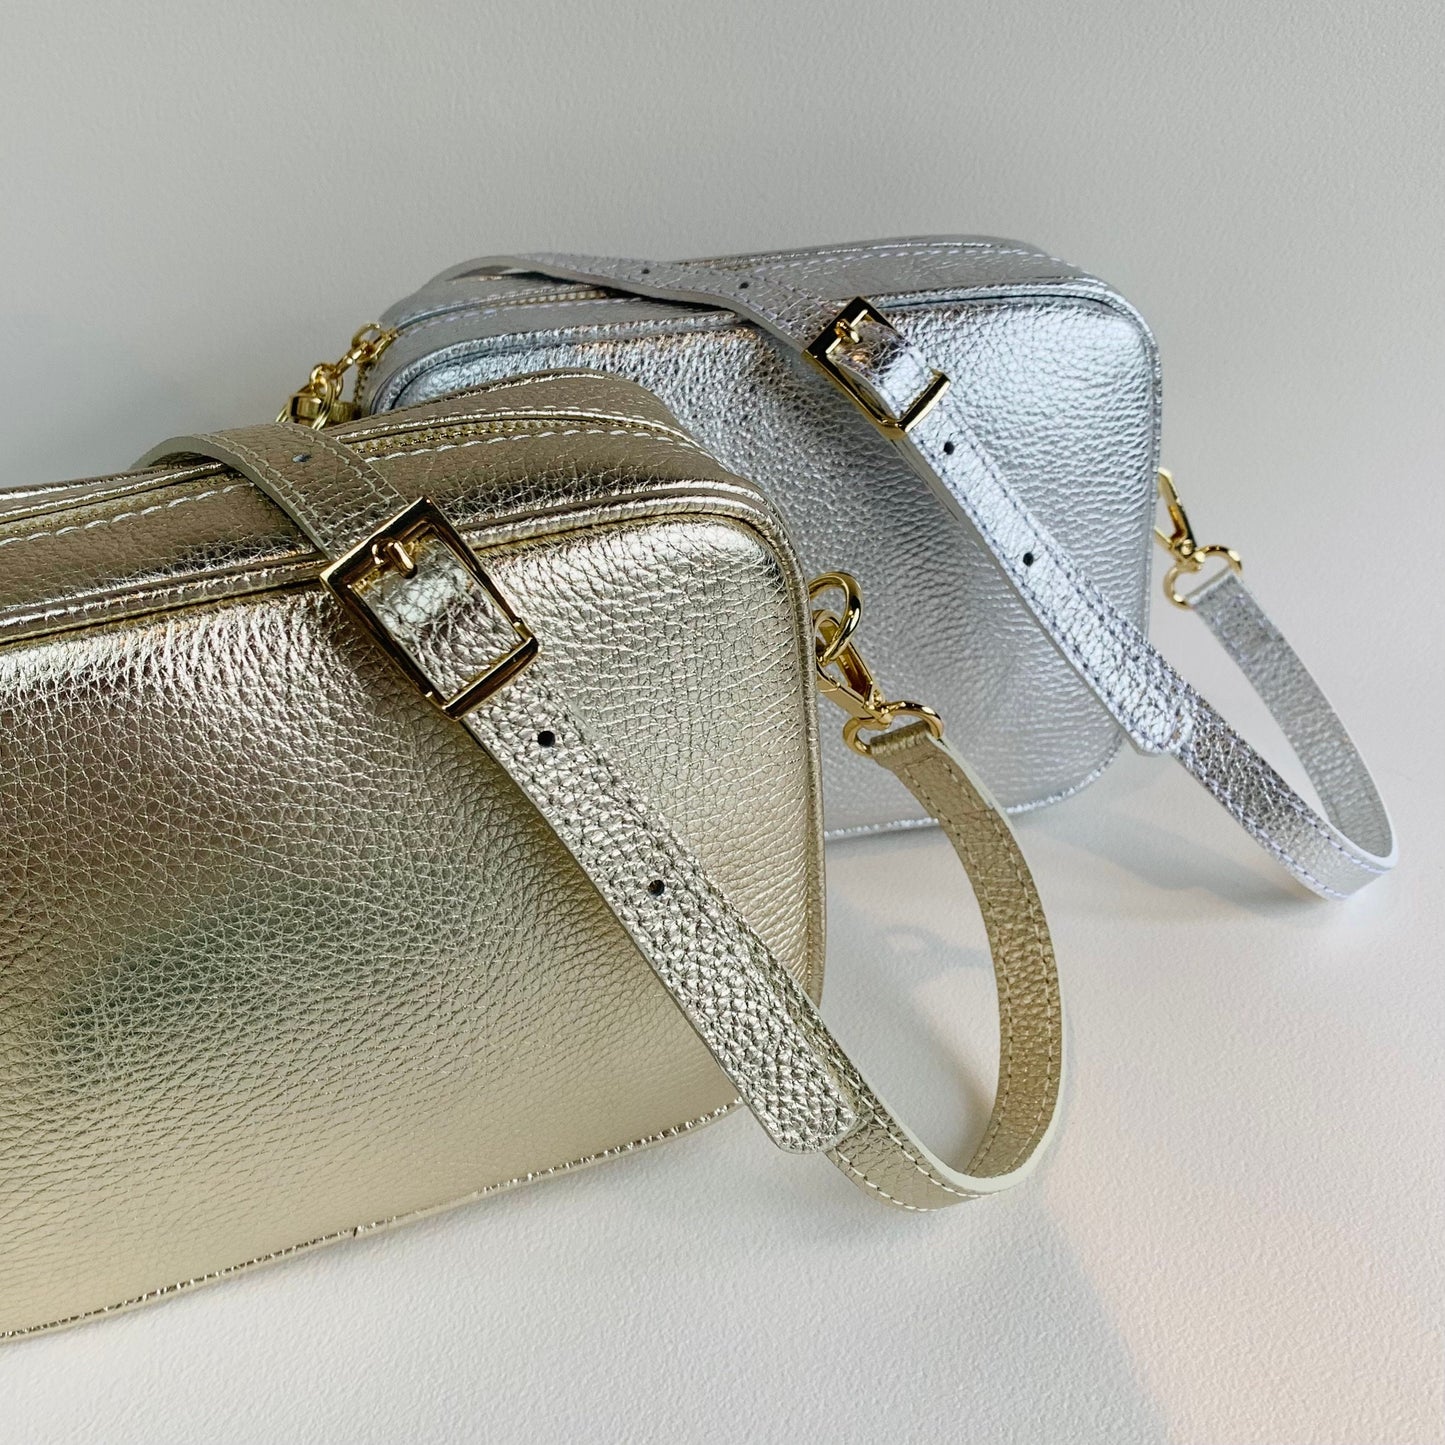 Gold/Silver Leather Crossbody Bag With Tassel - Darcy